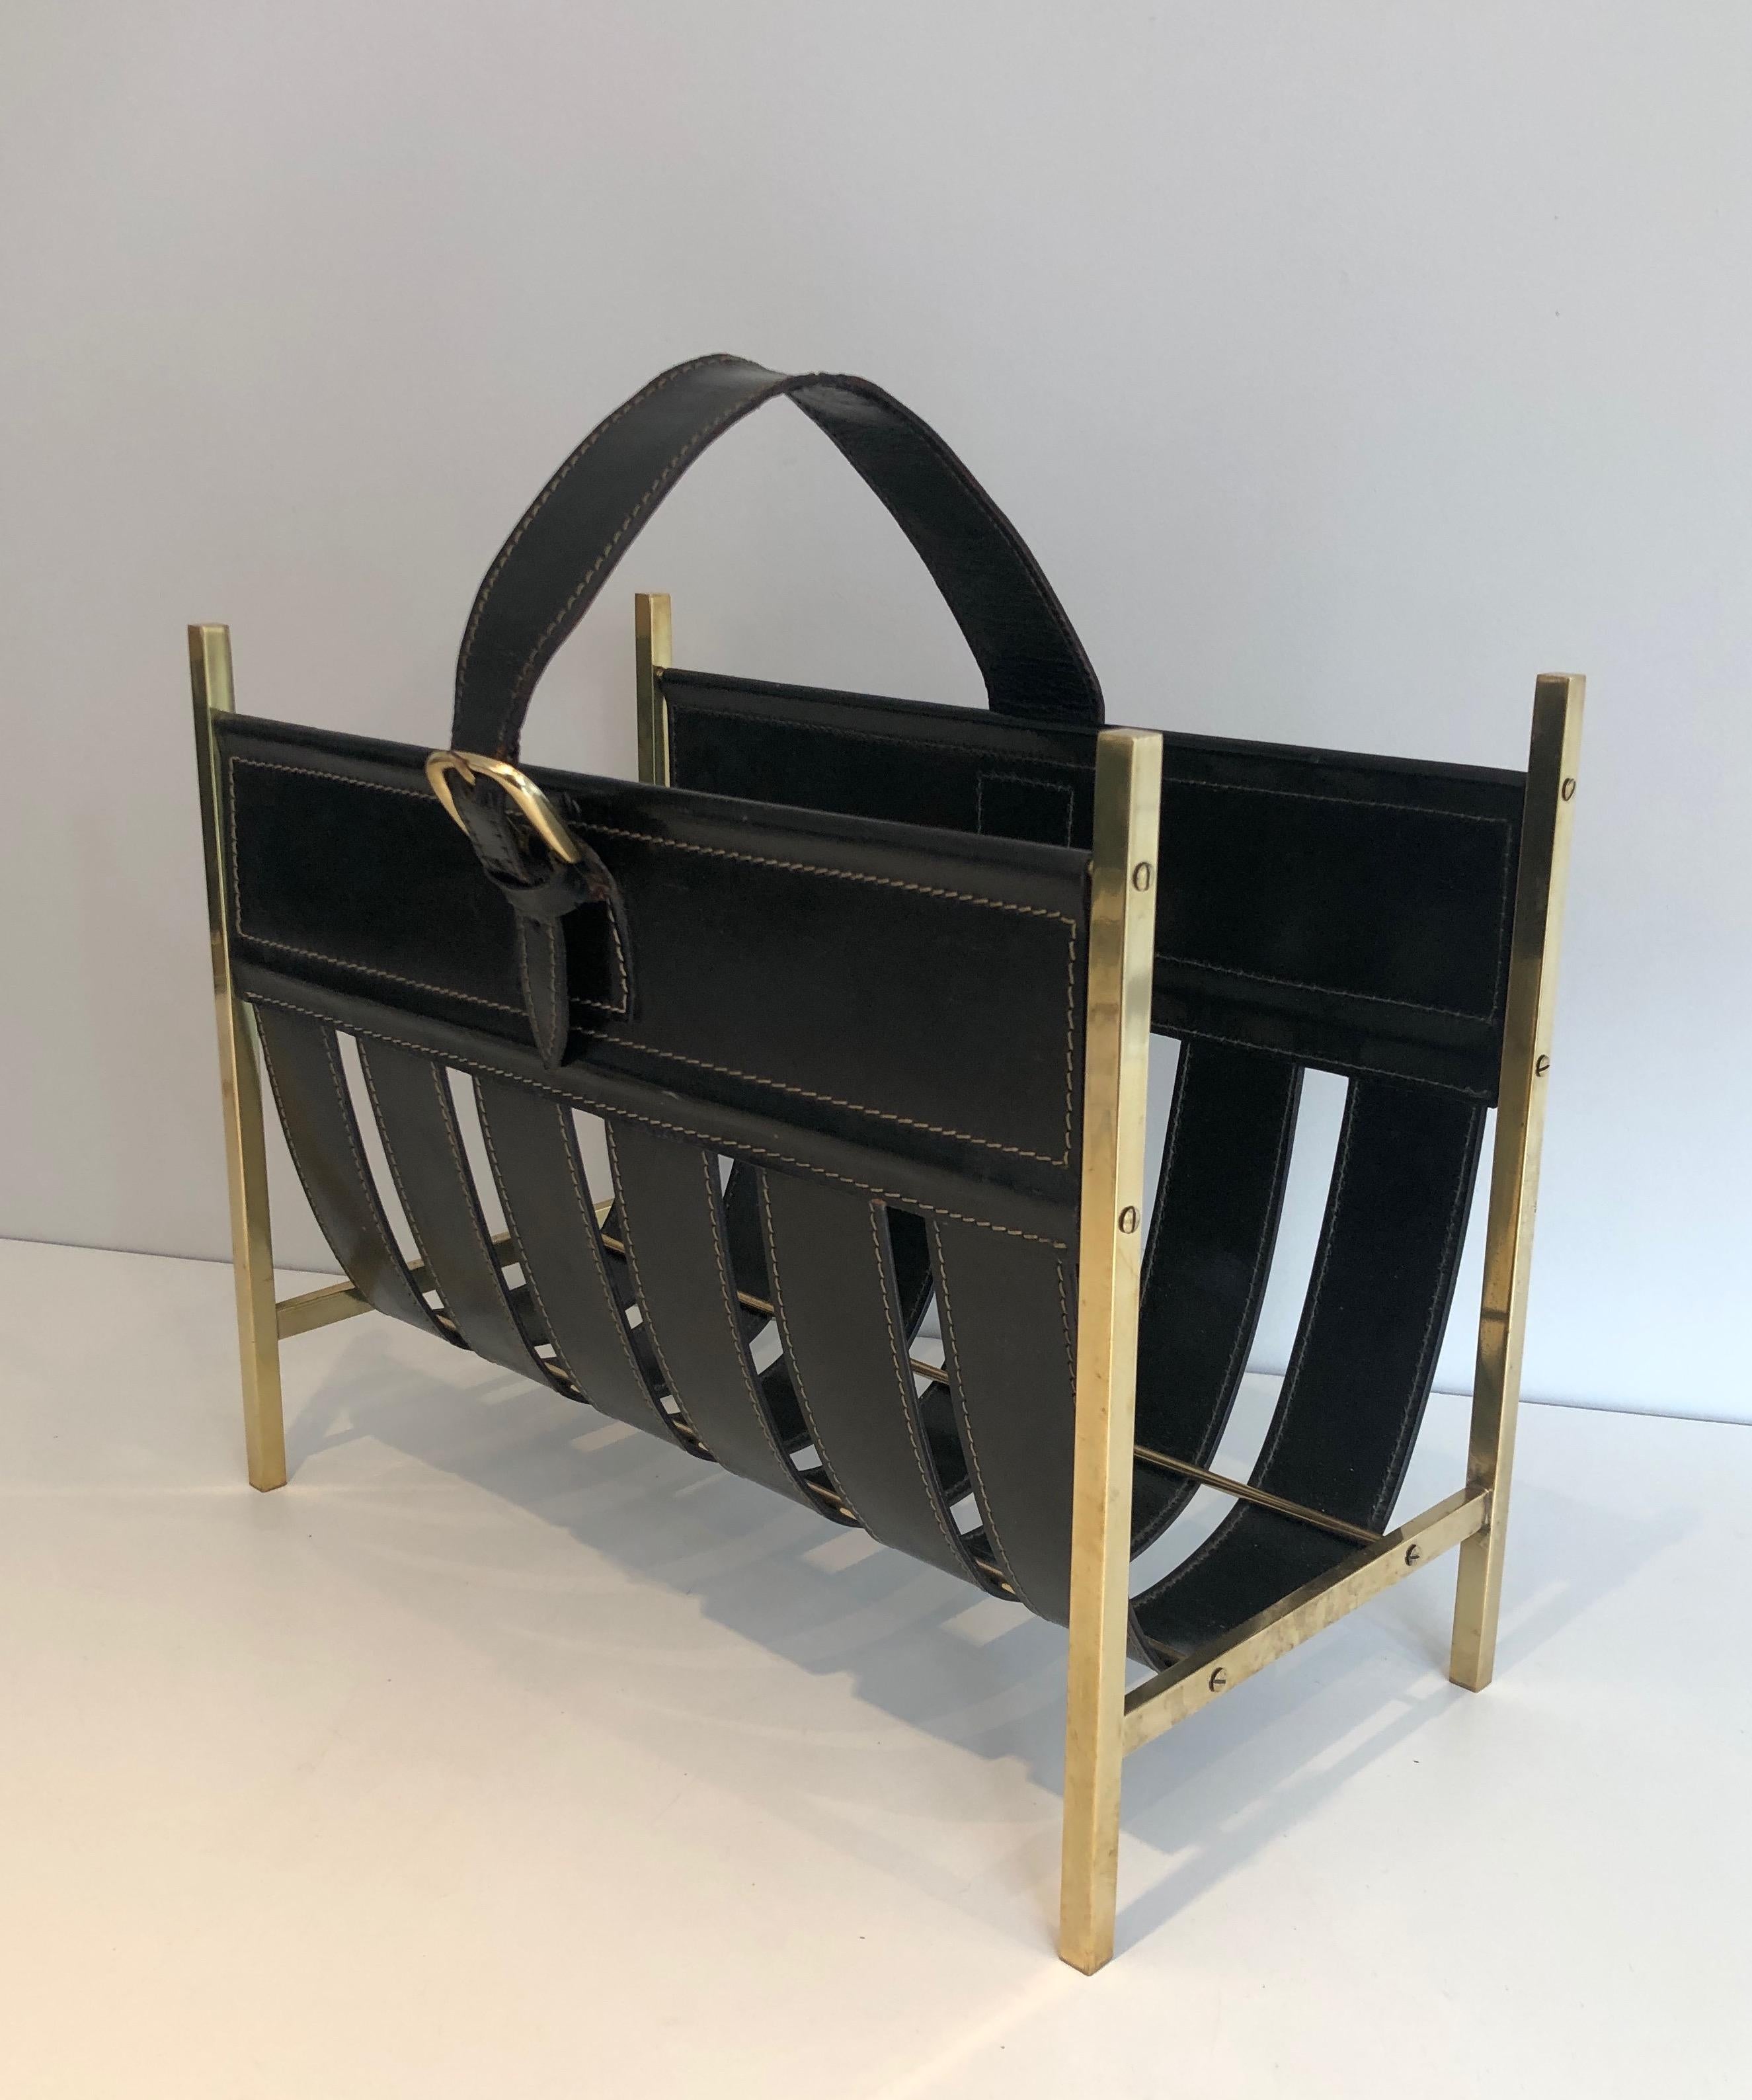 Hand-Bag Brass and Leather Magazine Rack by Jacques Adnet, circa 1940 For Sale 5